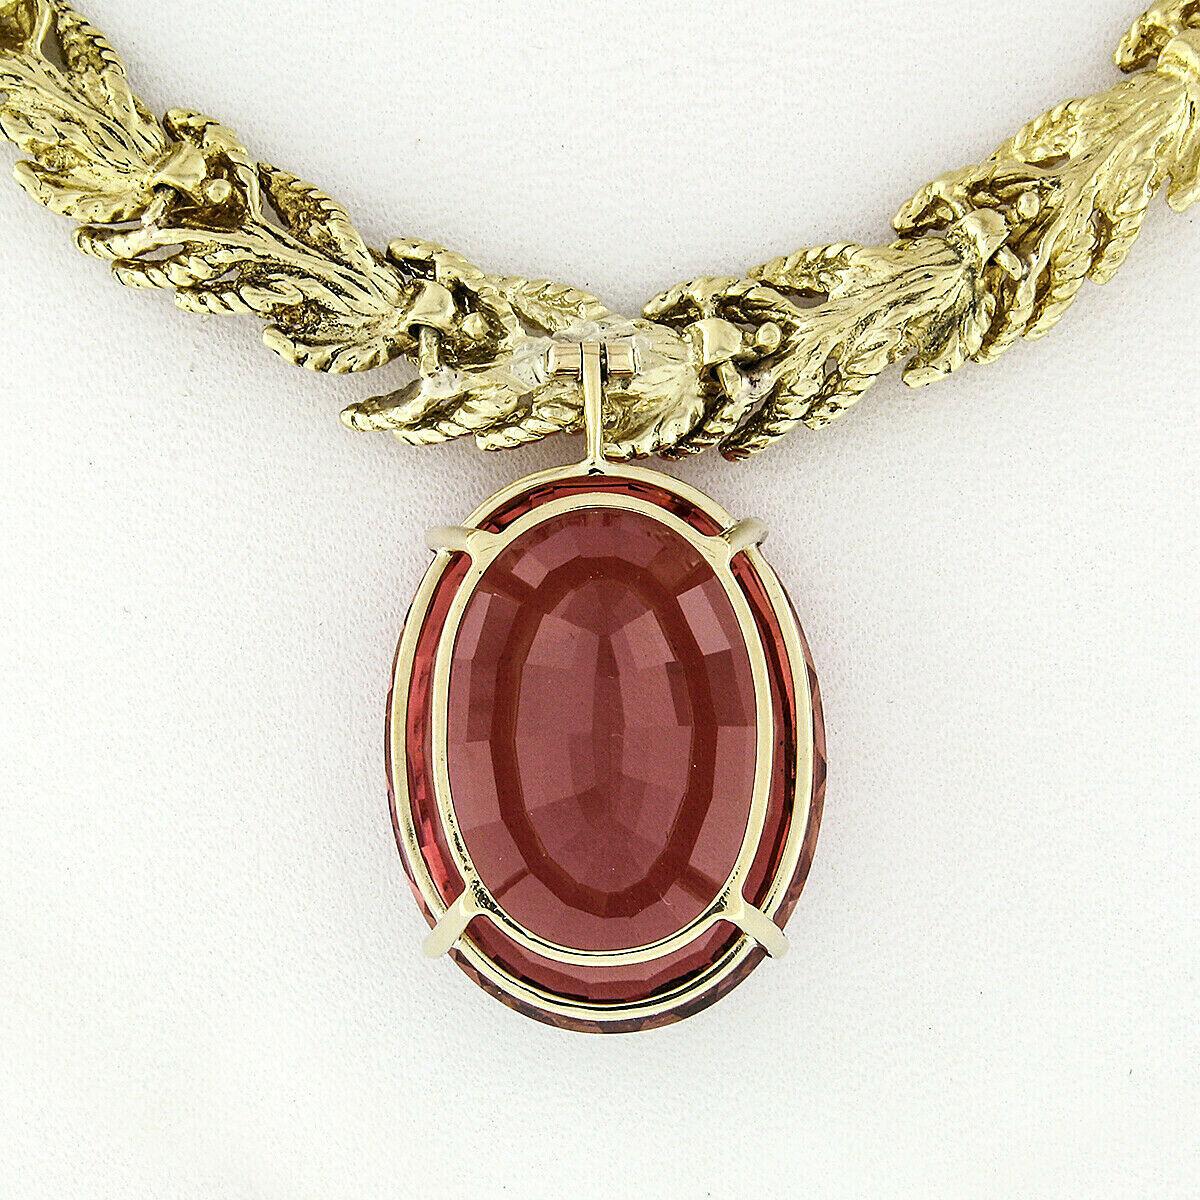 Women's Vintage 18k Gold GIA Large Oval 49.05ct Peach Tourmaline Statement Leaf Necklace